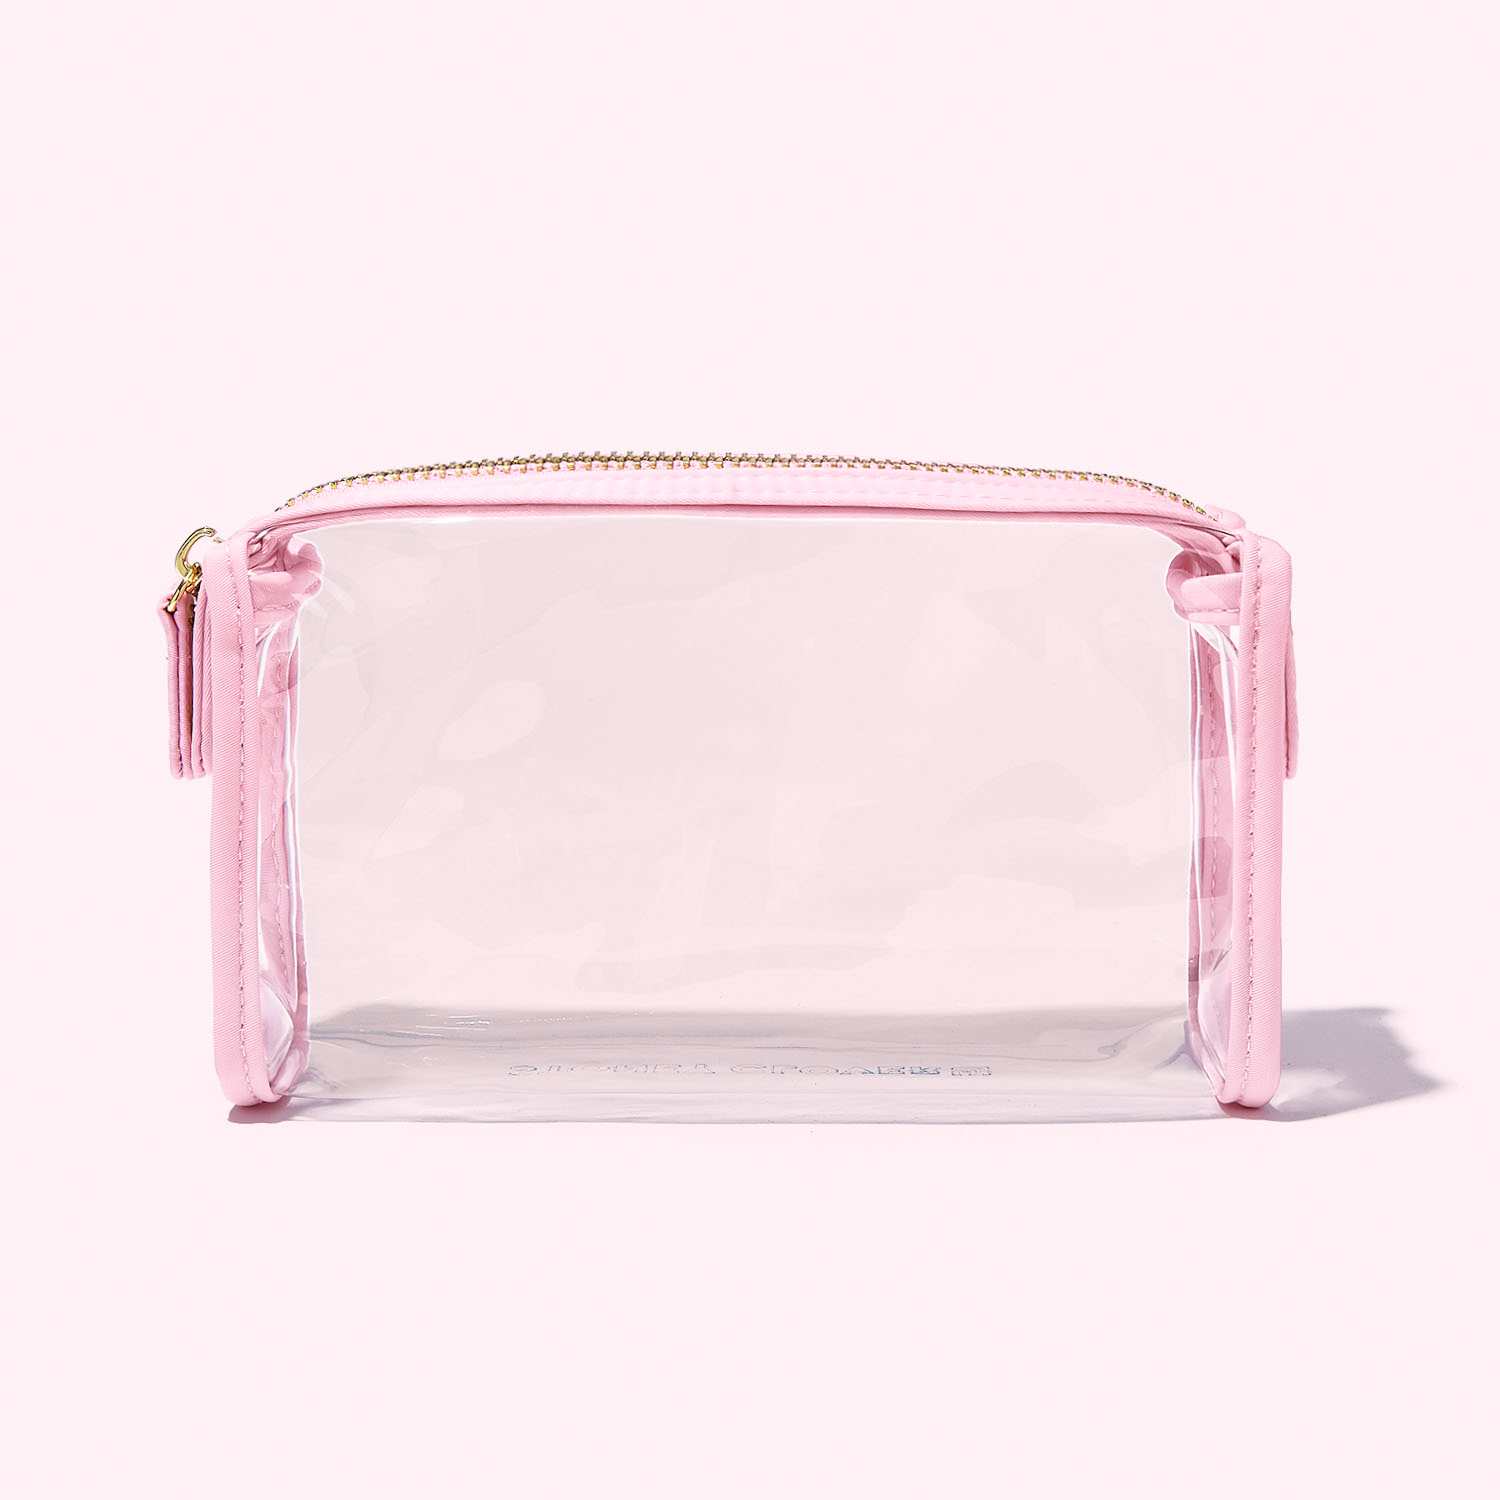 Stoney Clover Lane x Target Clear / Transparent Backpack Available